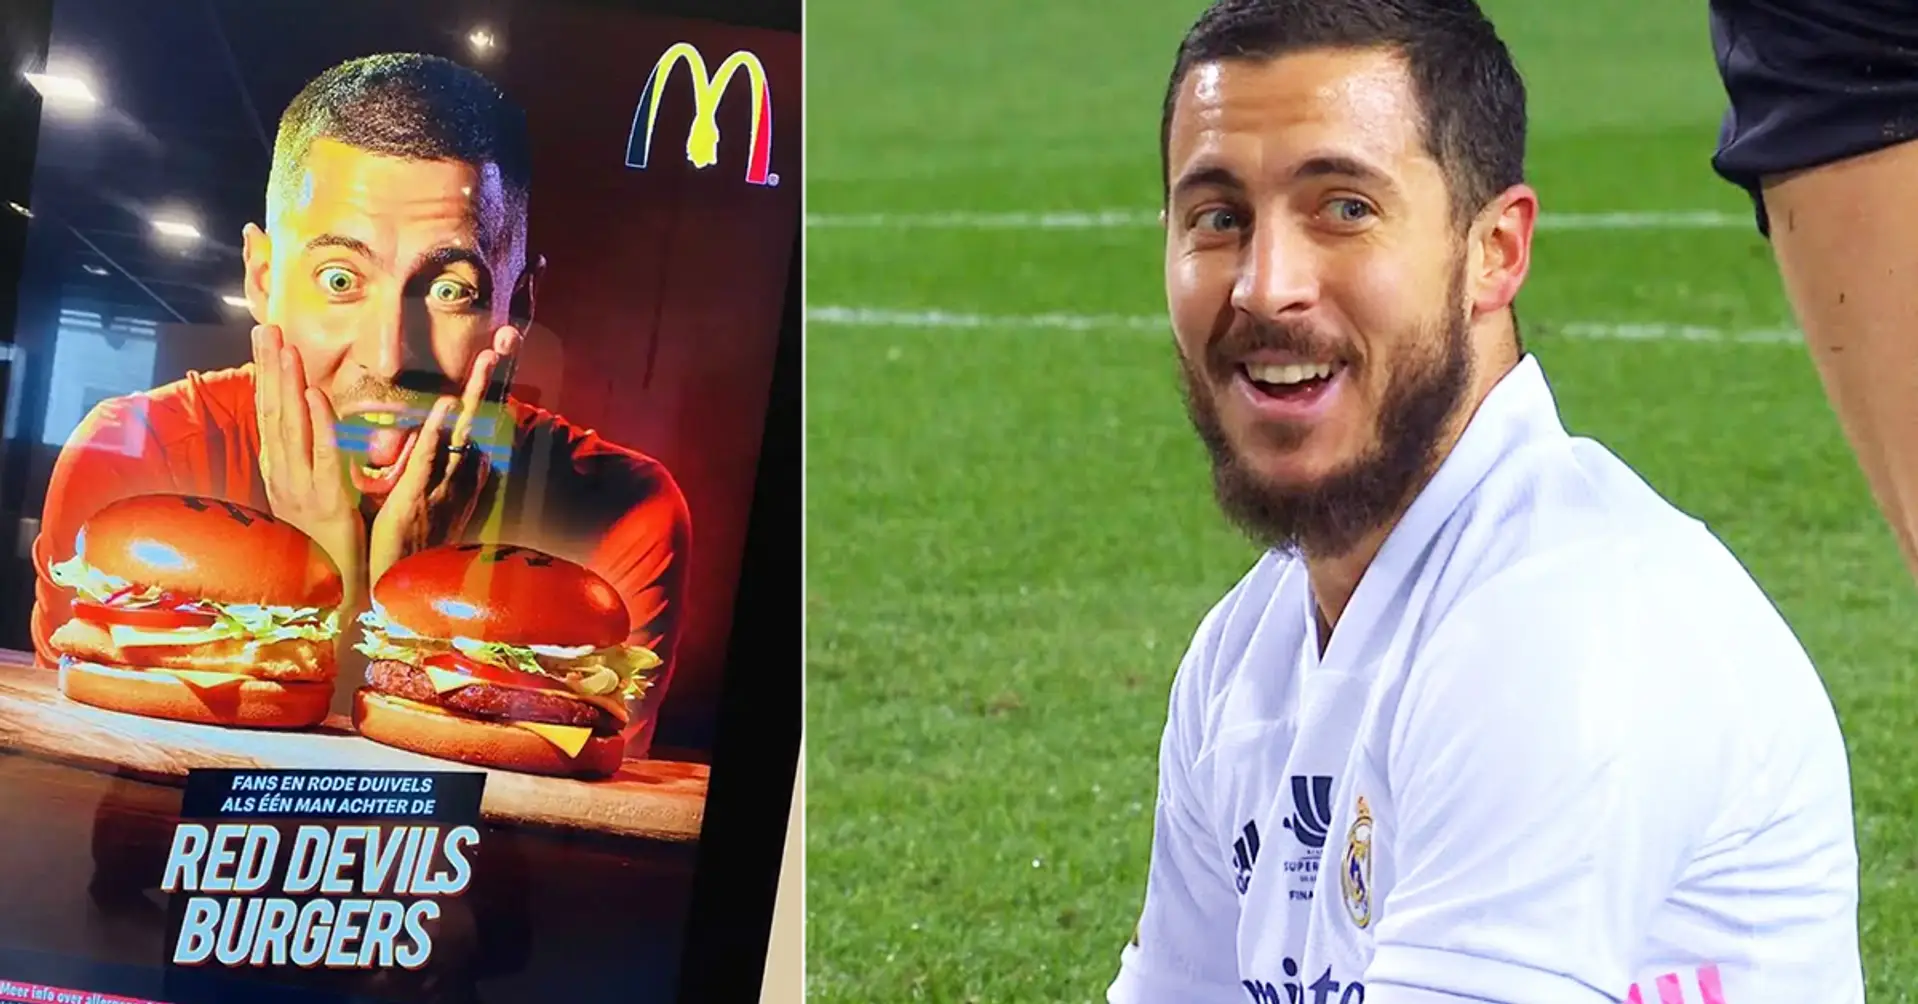 McDonald’s make Eden Hazard face of new advertising campaign, photo instantly goes viral